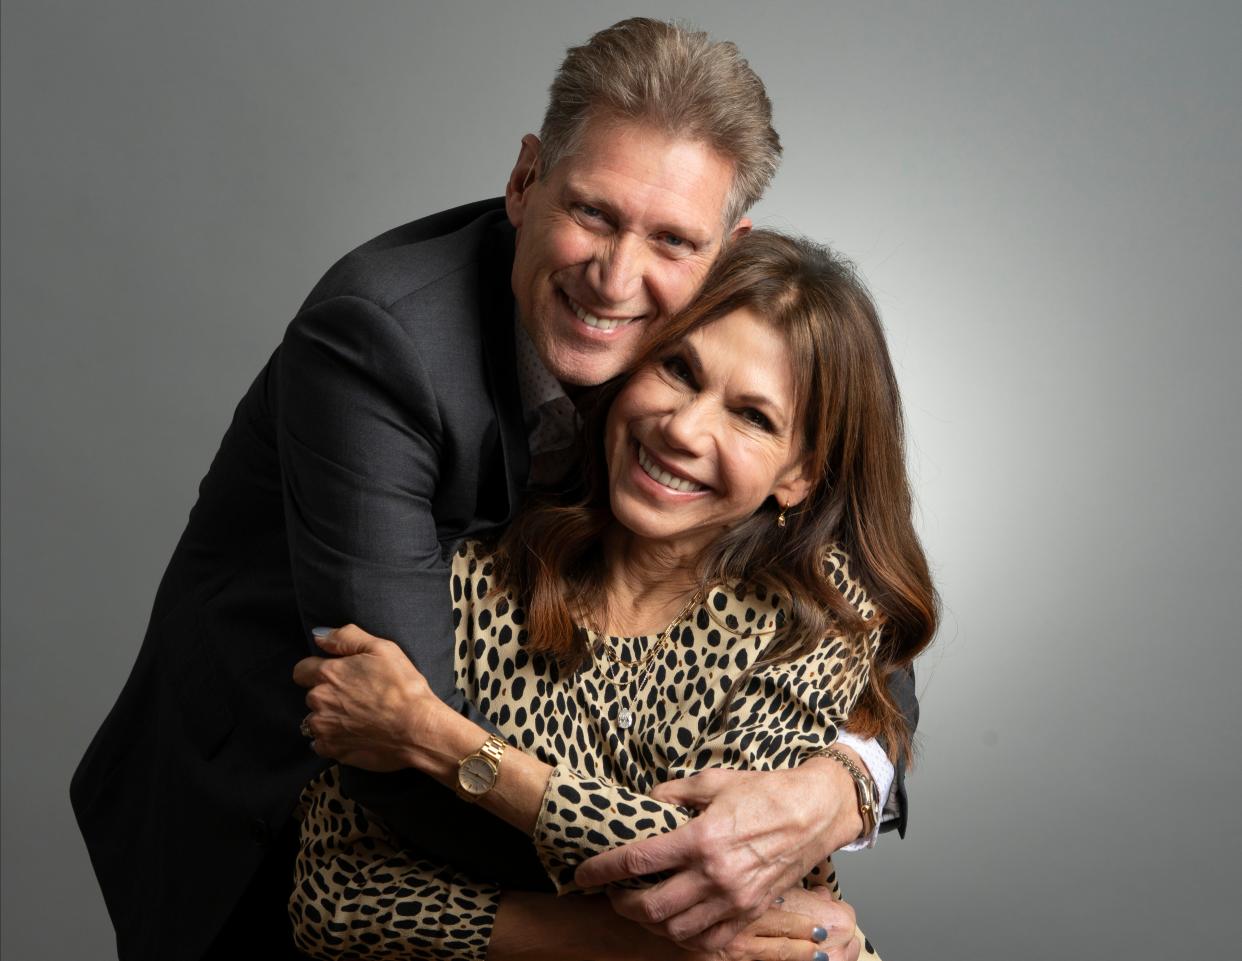 “Golden Bachelor” Gerry Turner and fiancée Theresa Nist pose for a portrait the day after the season series finale.